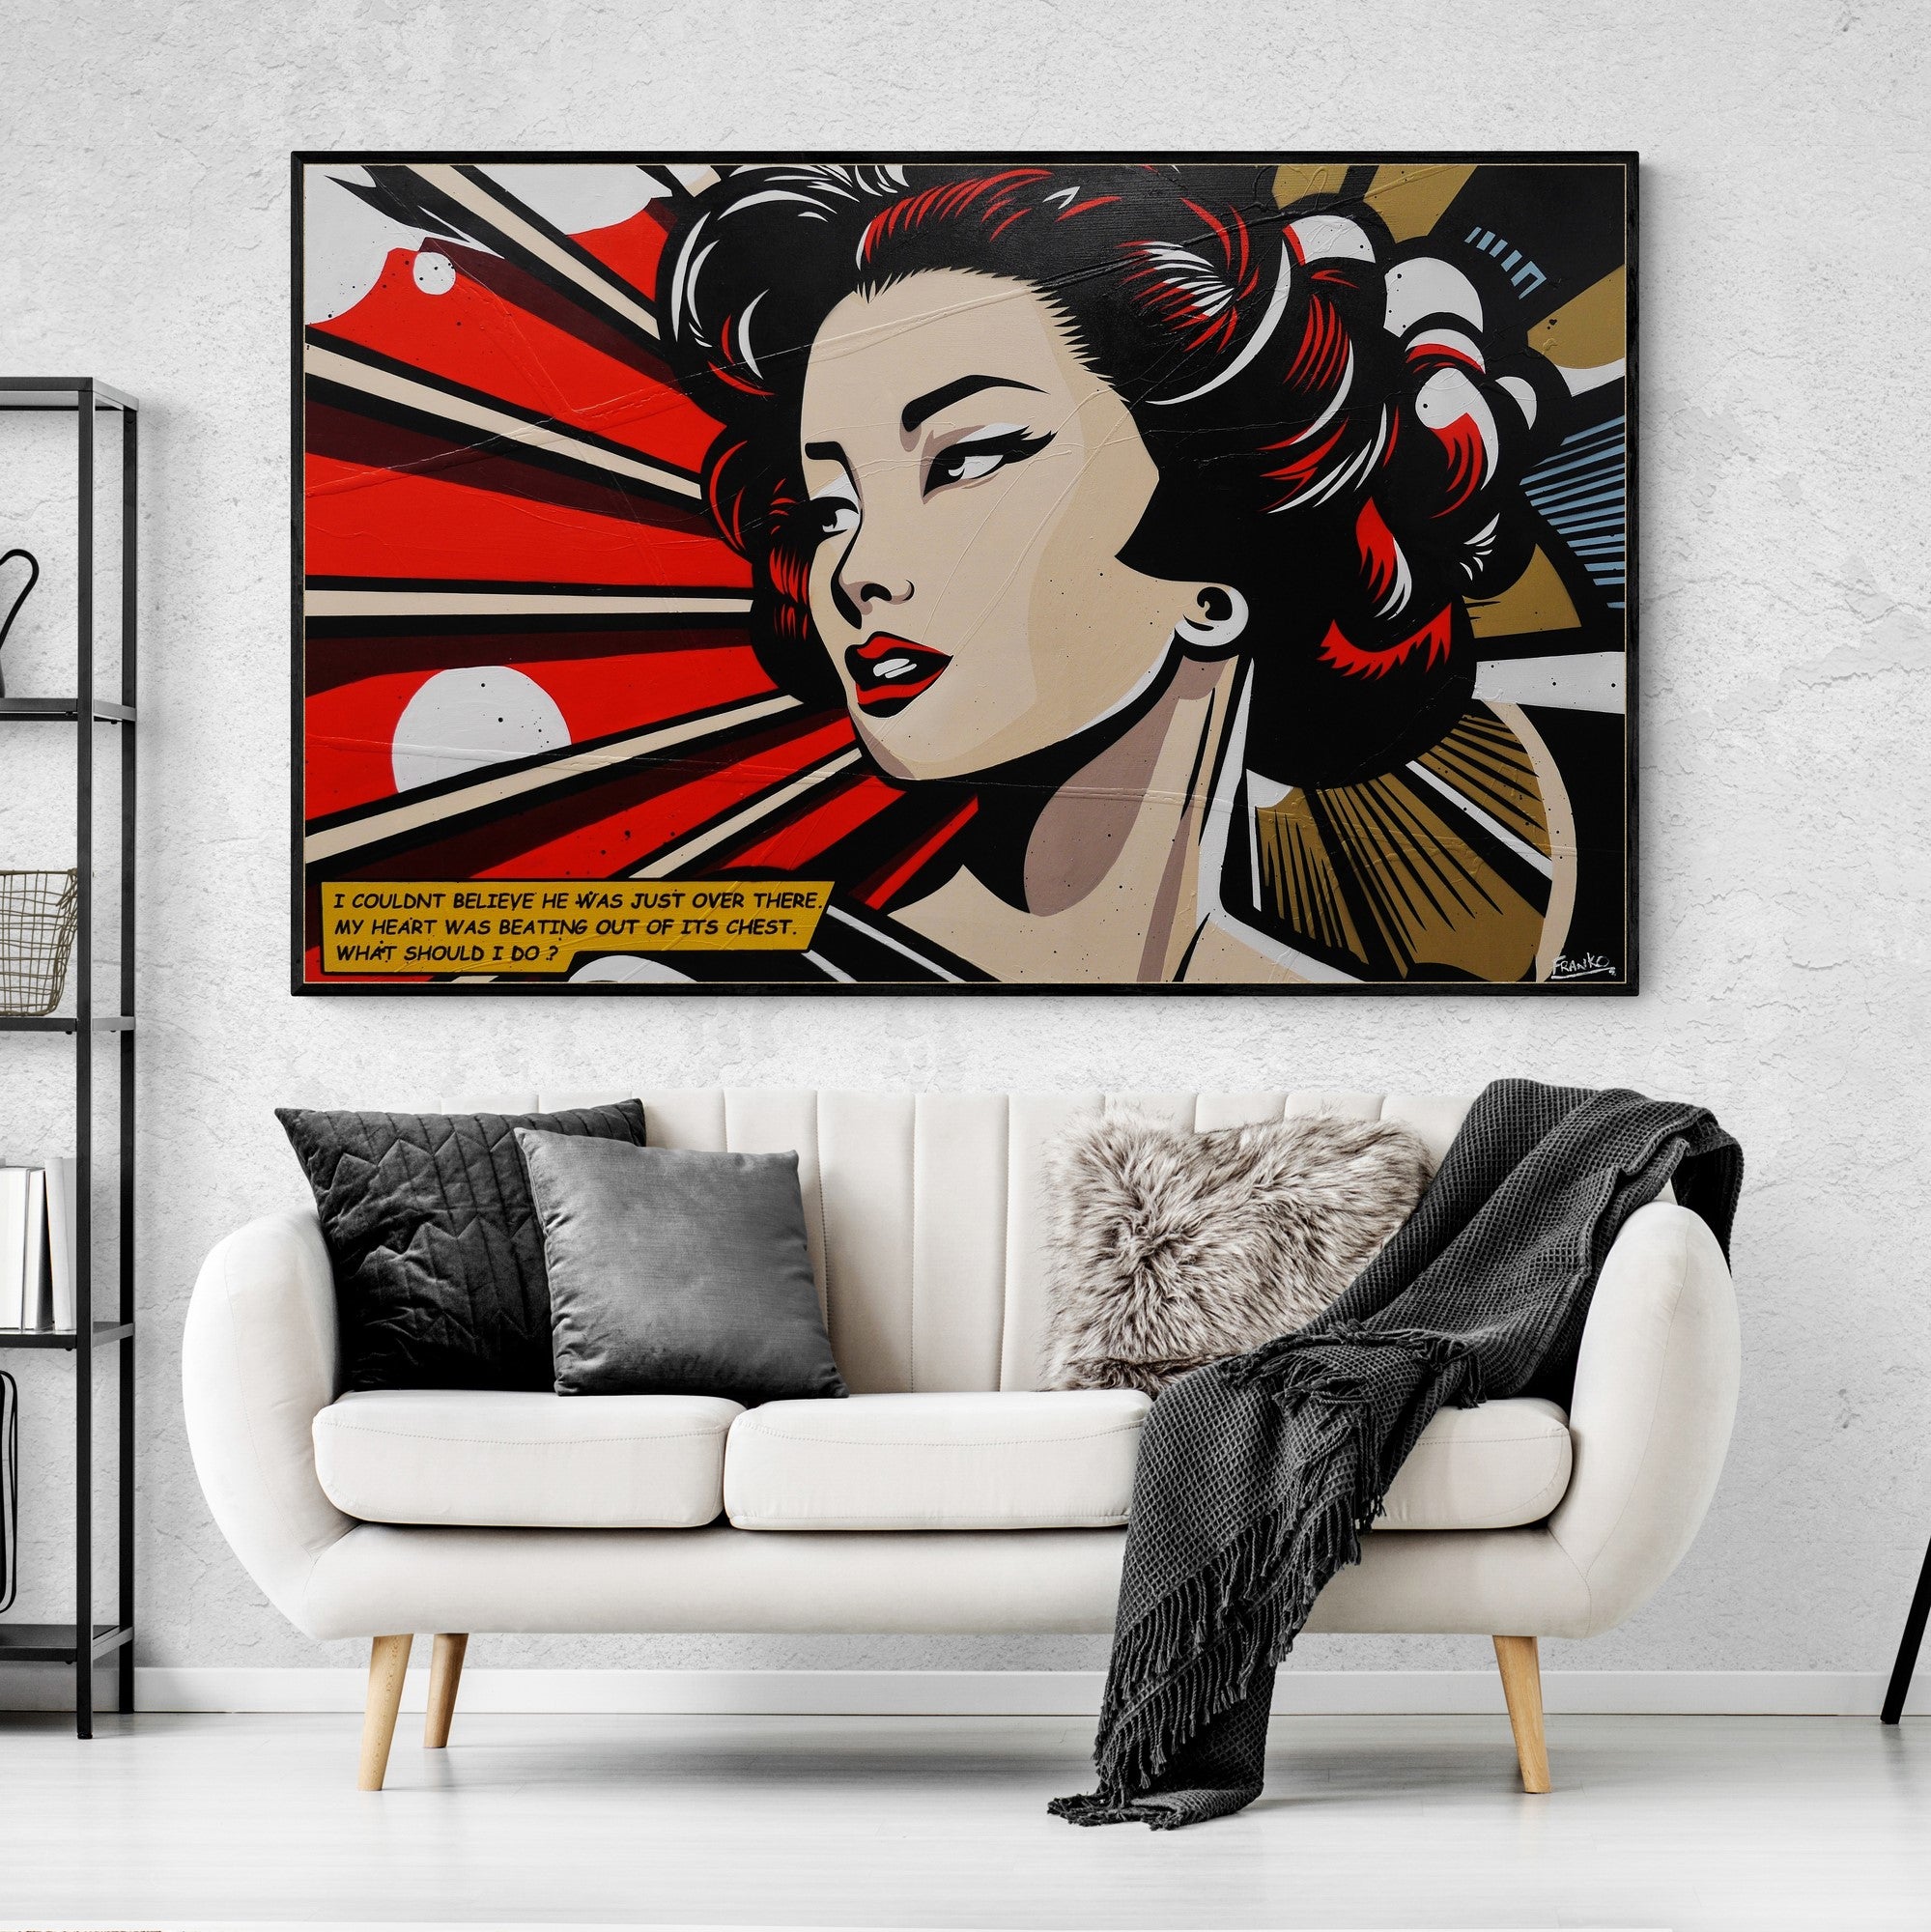 My Heart Was Beating ...160cm x 100cm Textured Classic Pop Art Painting (SOLD)